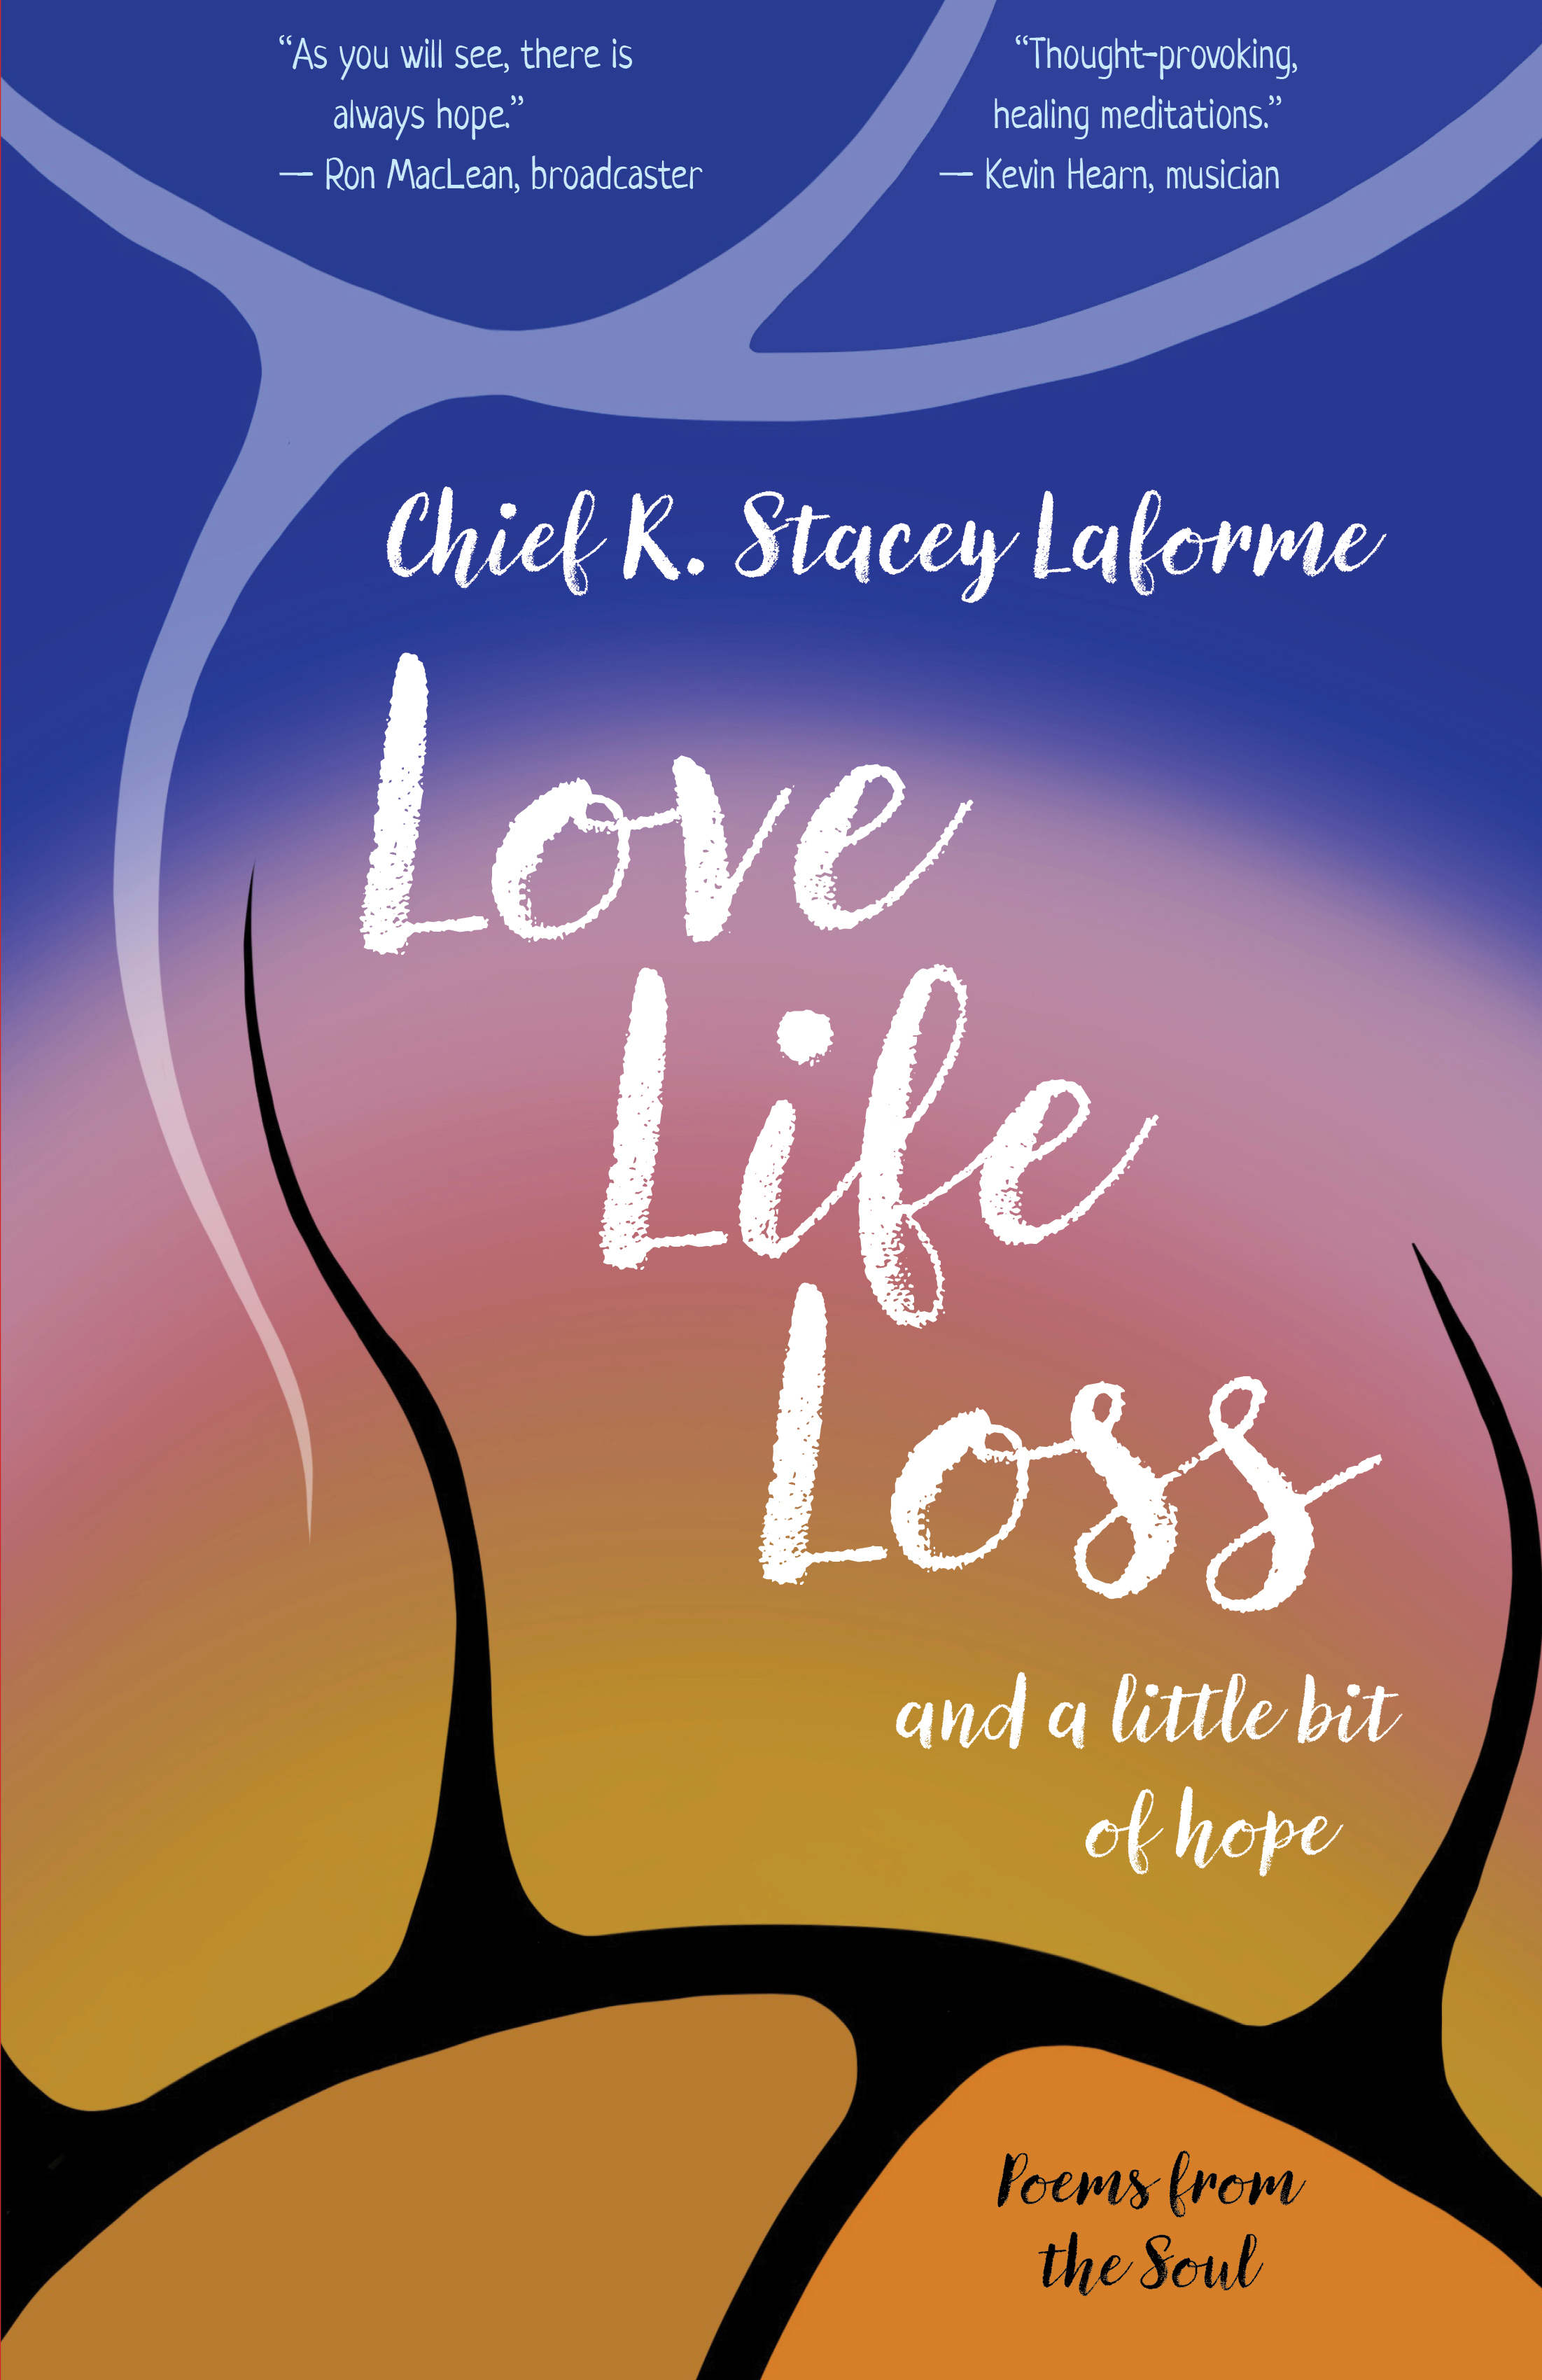 Love Life Loss and a little bit of hope : Poems from the Soul | Laforme, Chief R. Stacey (Auteur) | Hearn, Kevin (Auteur) | Gibbon, Samantha (Auteur)